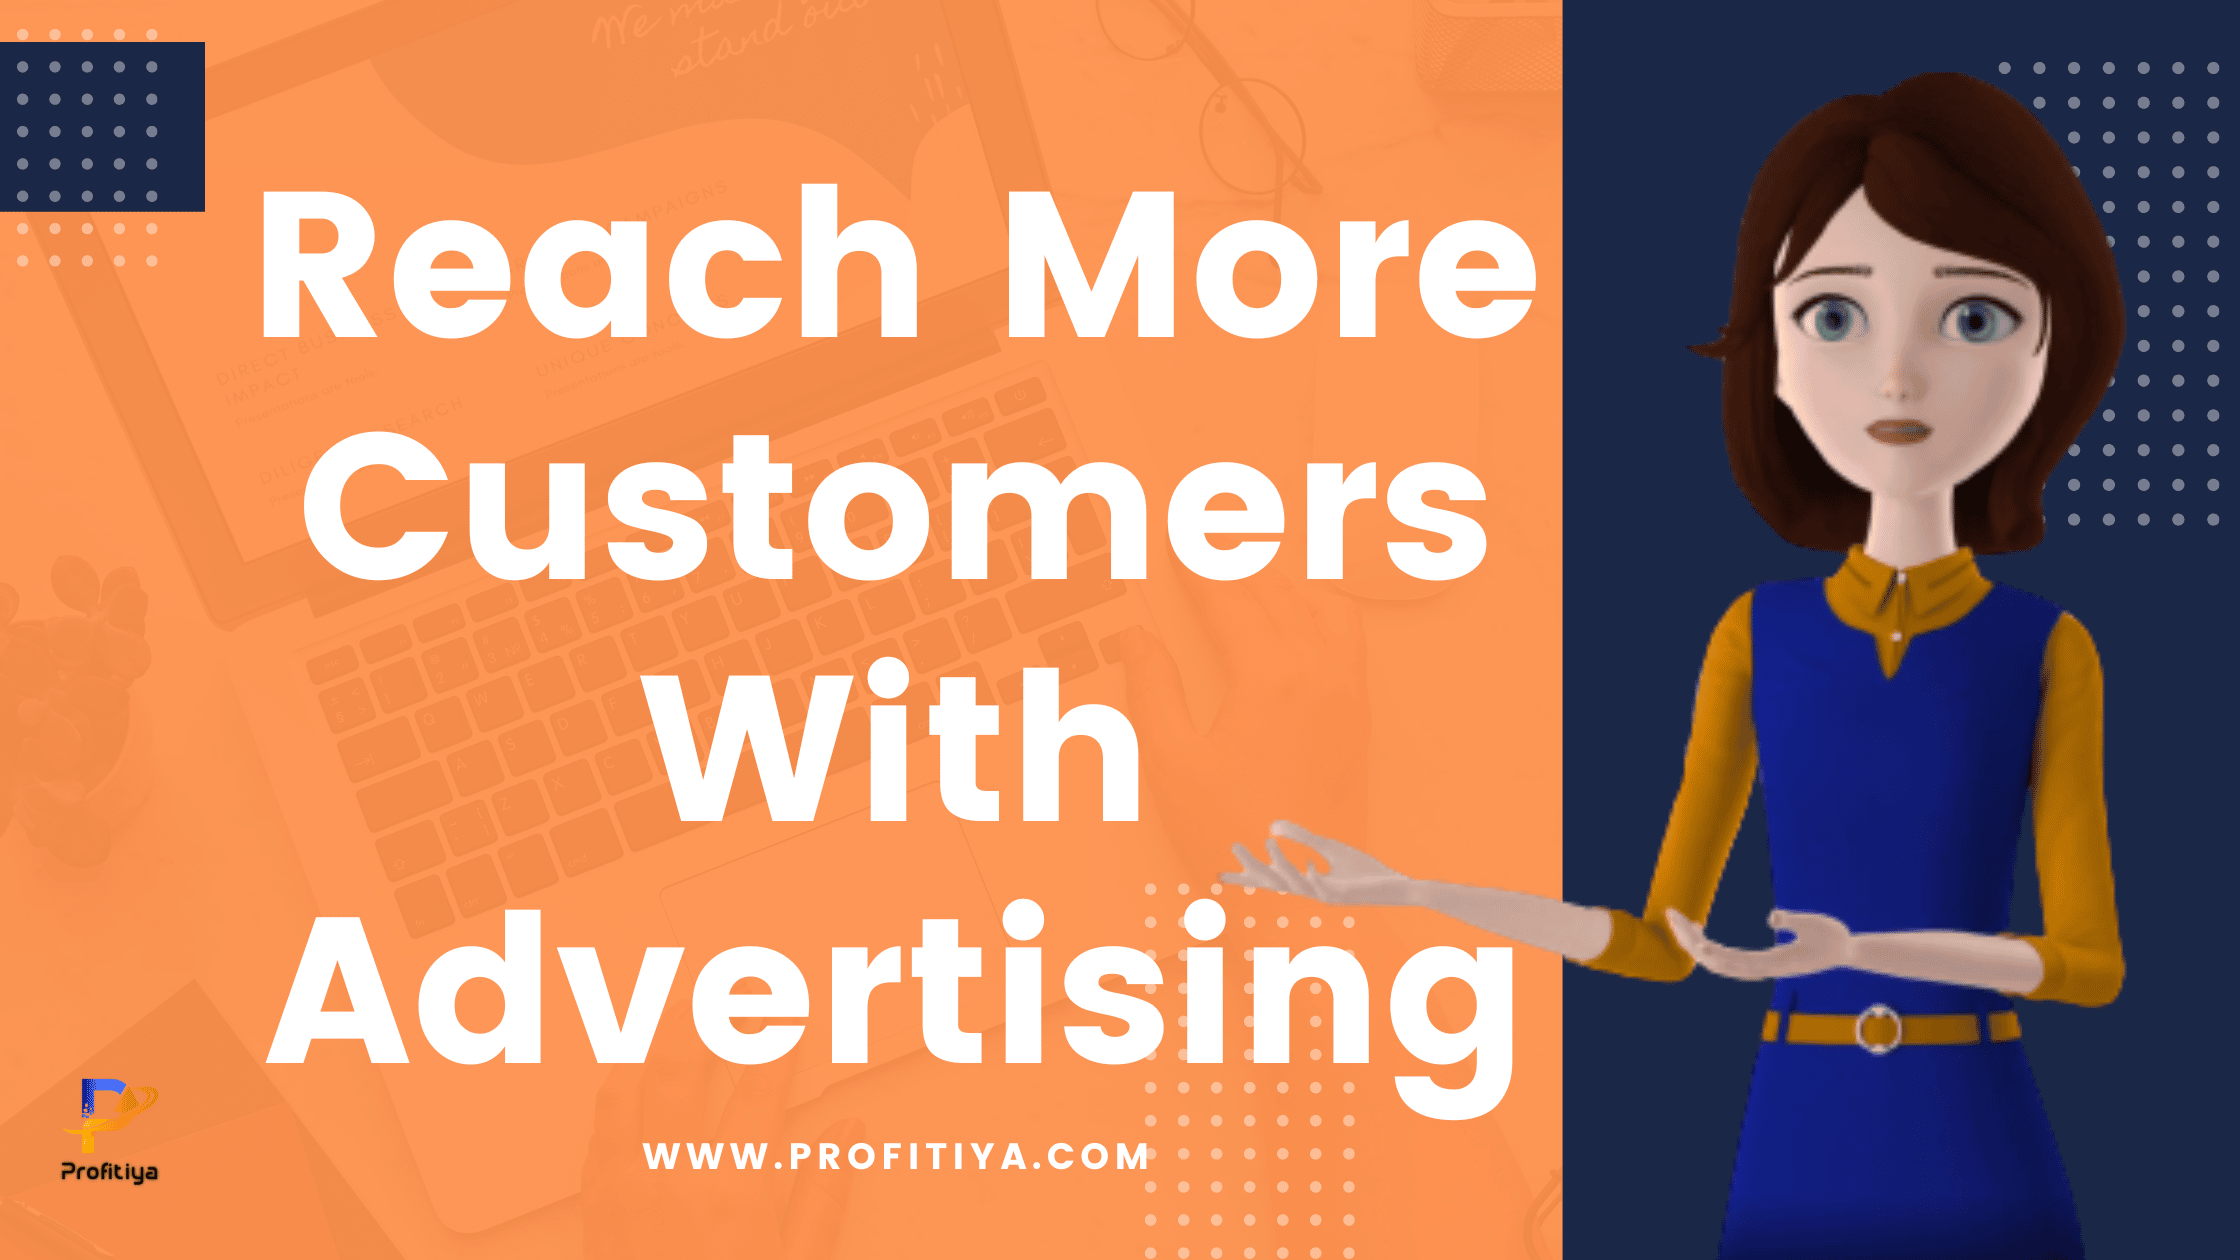 How To Reach More Customers With Advertising?